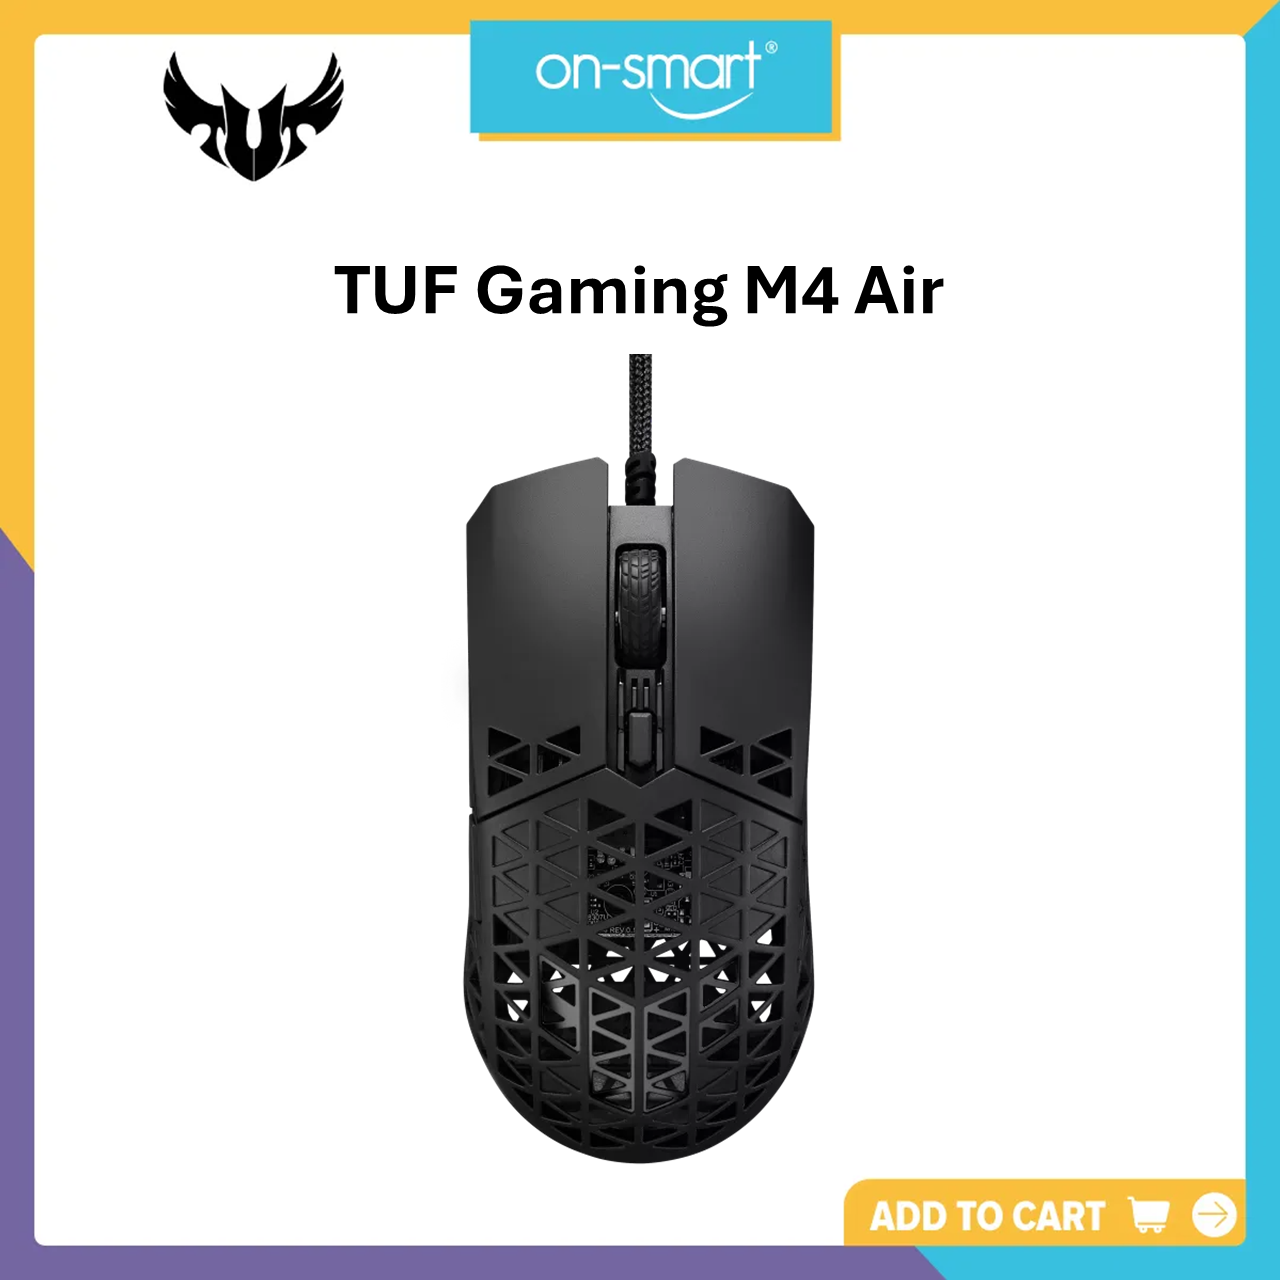 ASUS TUF P307 Gaming M4 Air Wired Gaming Mouse